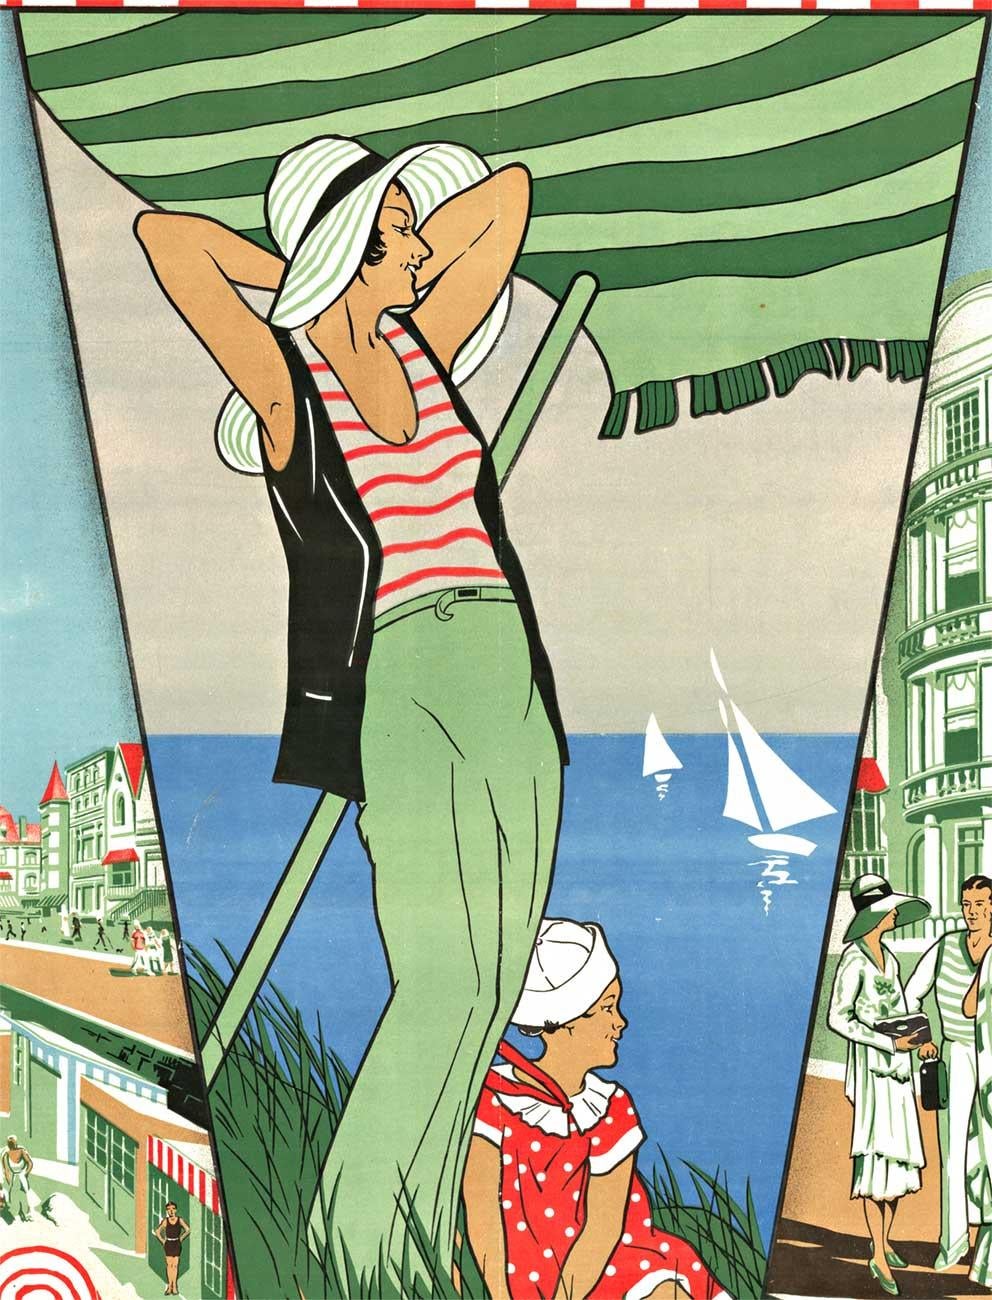 Beautiful art deco original vintage poster La Panne from 1932. A chromolithograph with the addition of silver ink makes this original Belgium beach poster pop!
Fashionable people are shown on the beach's boardwalk while others are sunbathing on the